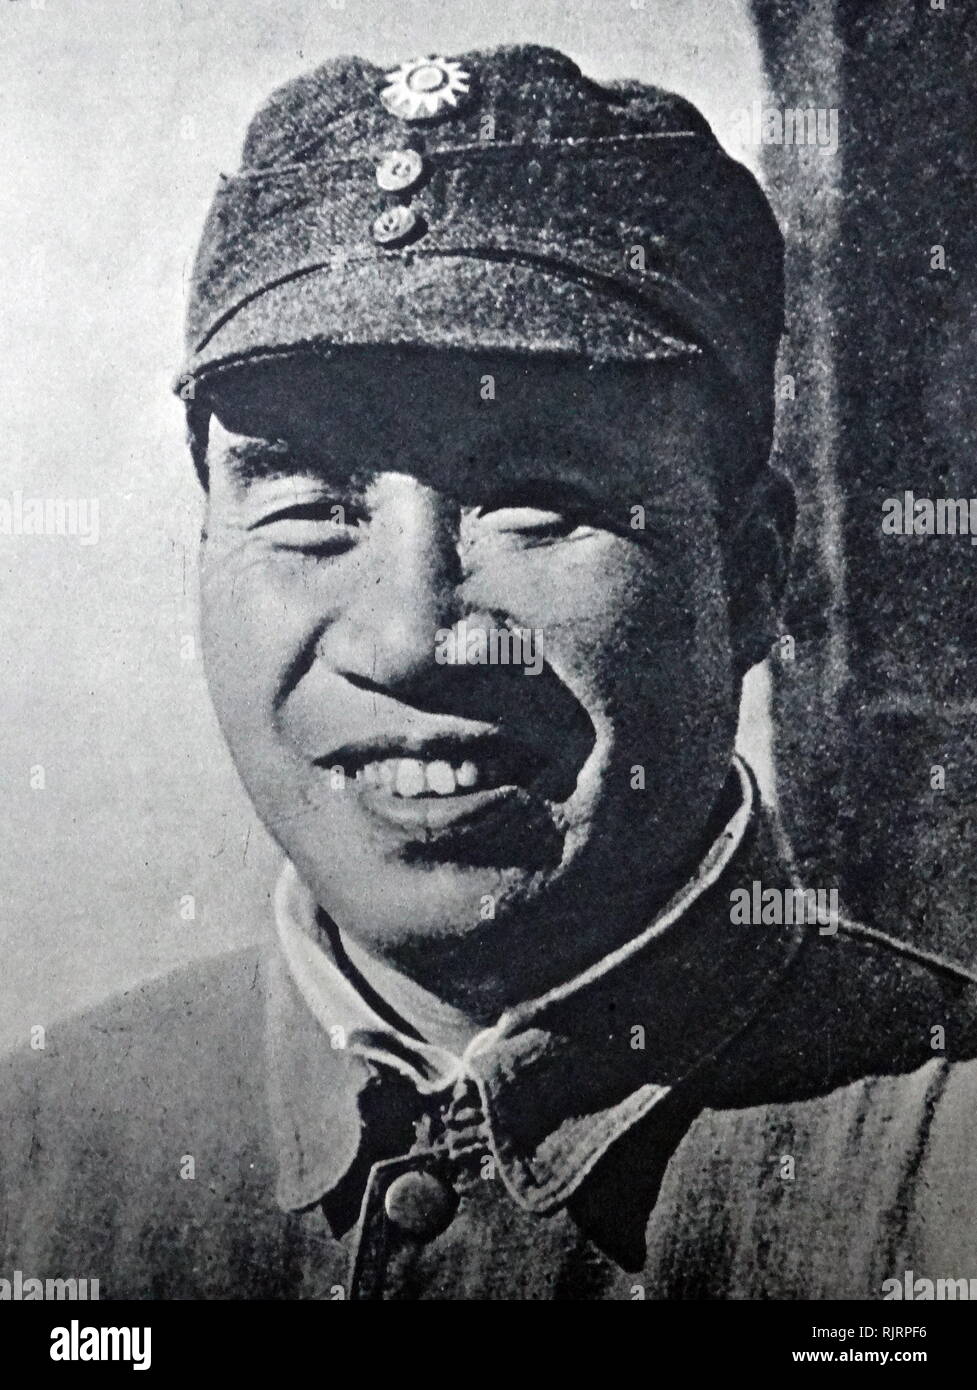 Zhu De (1886 - 1976), Chinese general, warlord, politician, revolutionary and one of the pioneers of the Communist Party of China. Stock Photo